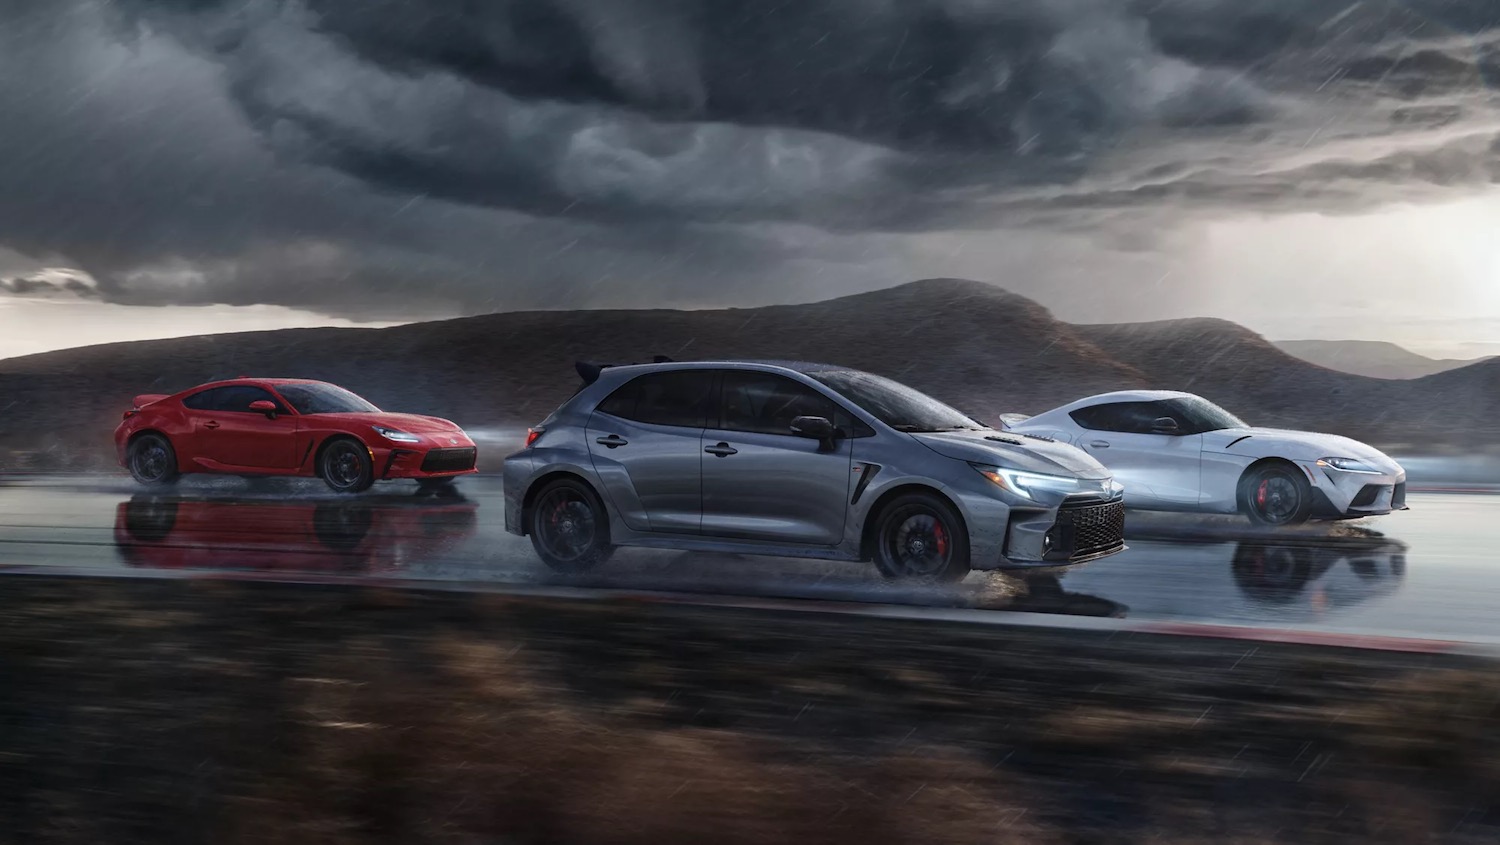 Toyota Gazoo Racing advertisment is the GR86, GR Corolla, and Supra racing down a track together.